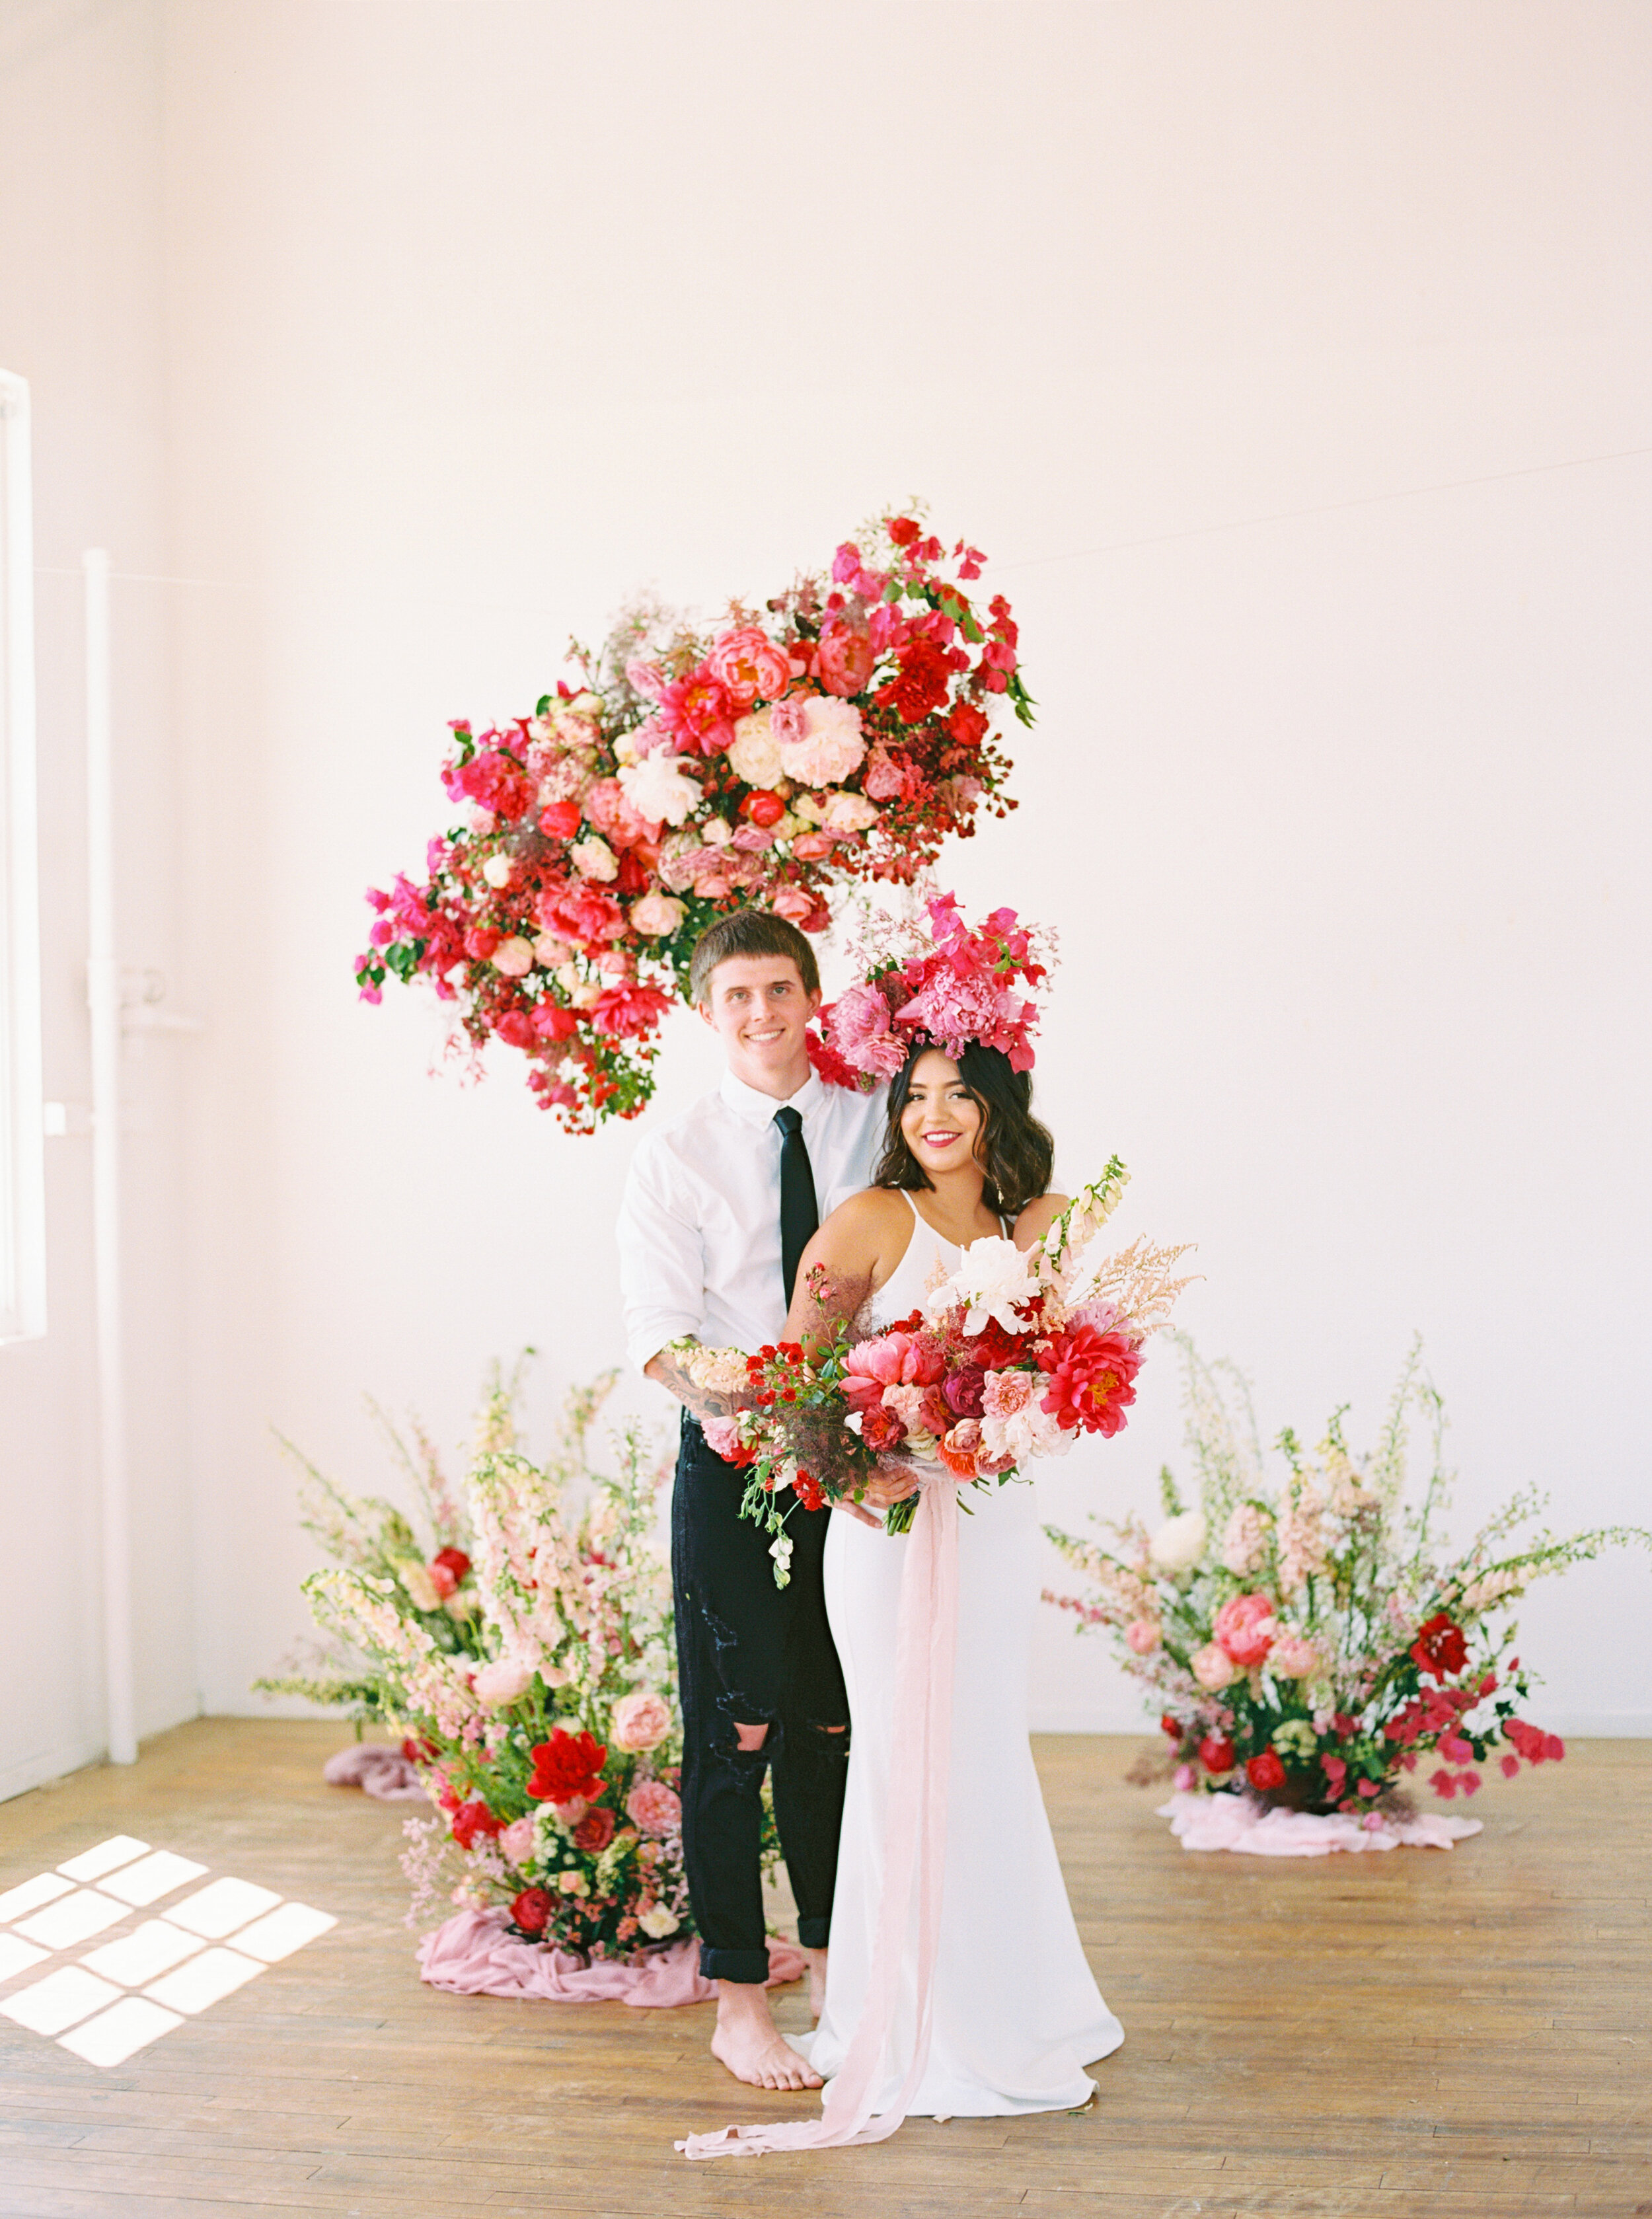 A Romantic Wedding Elopement Filled with Colorful Fuchsia - Sarahi Hadden Submission-117.jpg